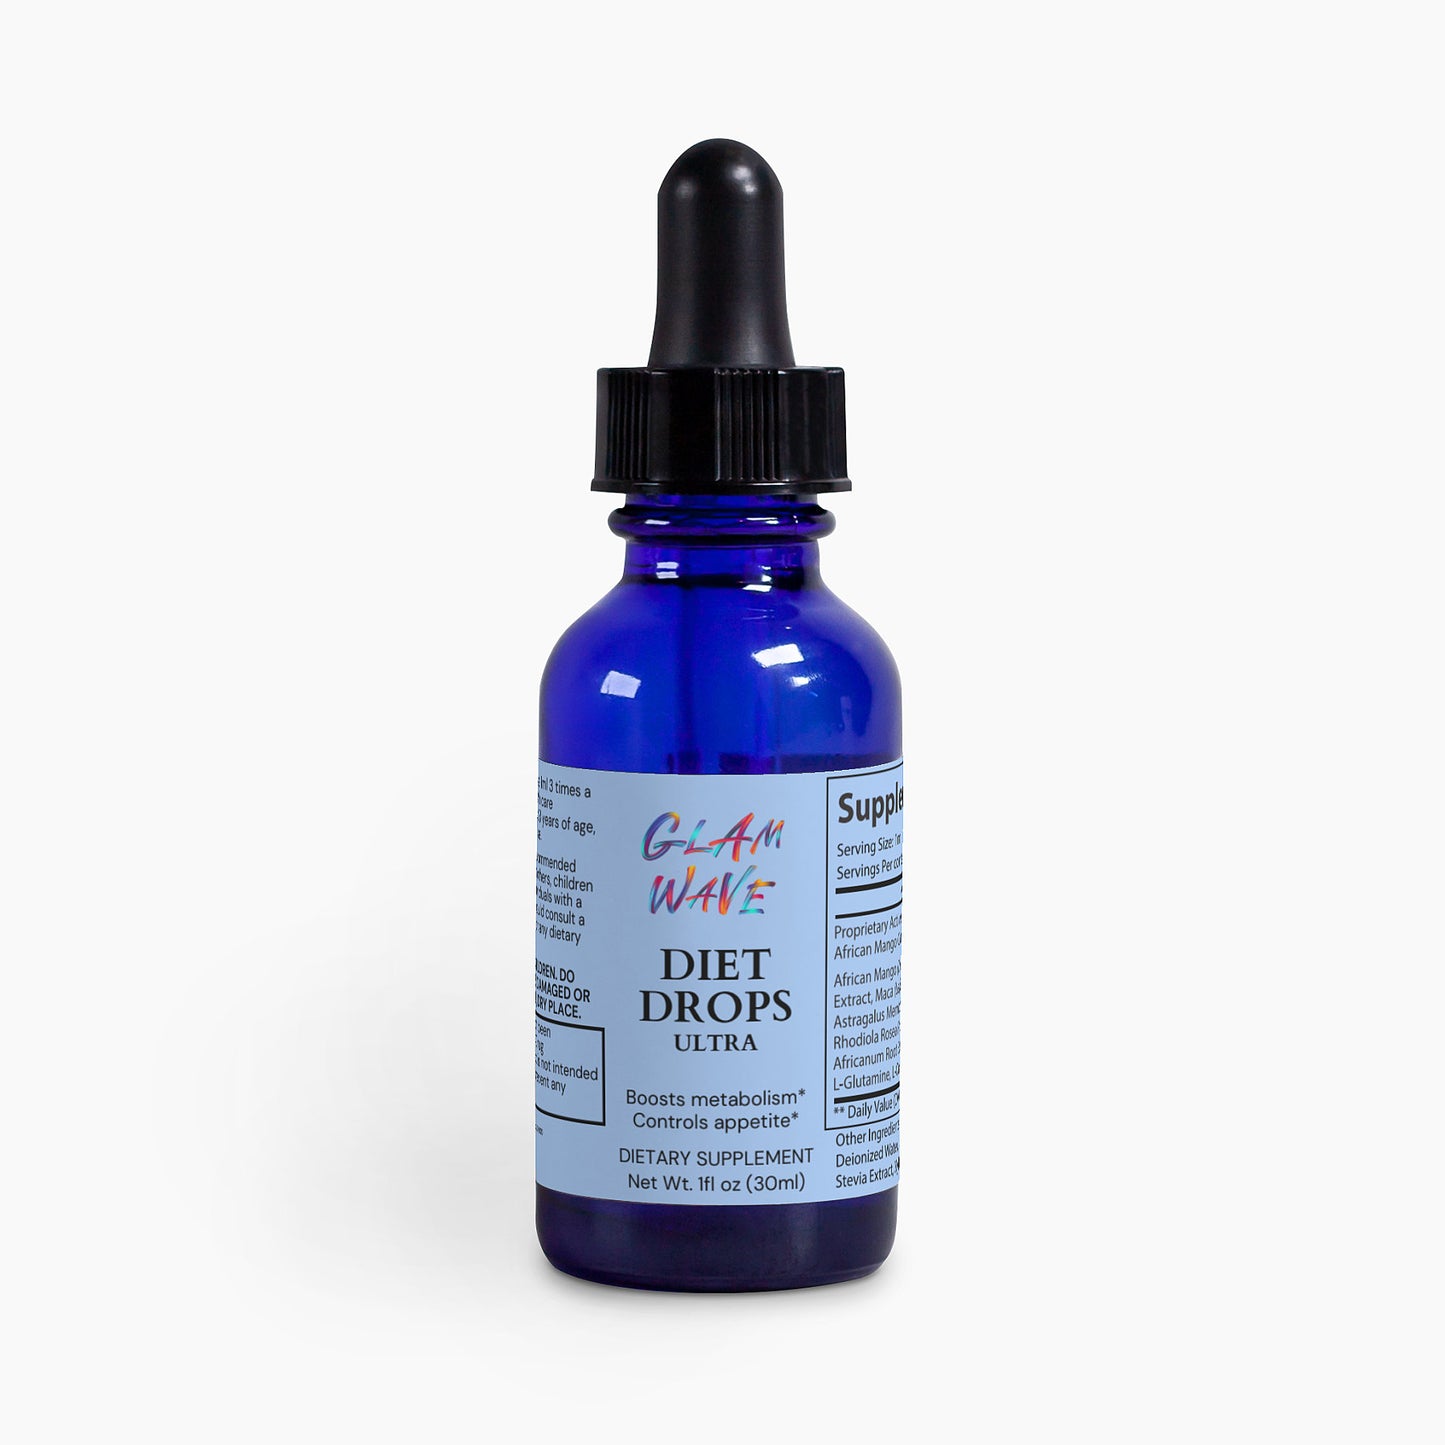 Diet Drops Ultra 1 oz Glam Wave